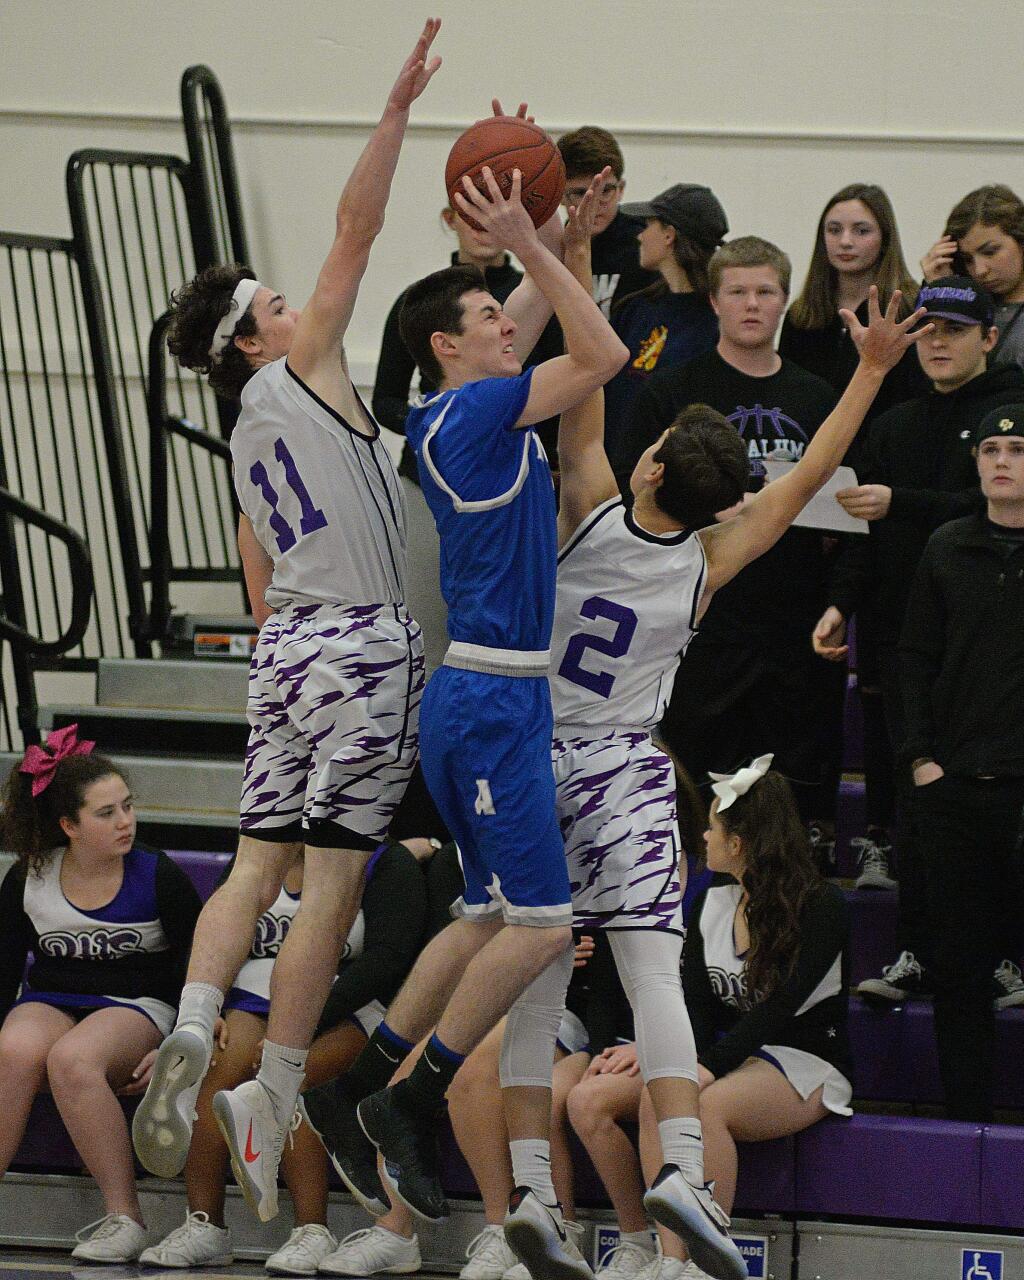 SUMNER FOWLER/FOR THE ARGUS-COURIERPetaluma's Brendan O'Neill and Austin Paretti sandwich an Analy shooter in SCL game won by Analy, 53-39.